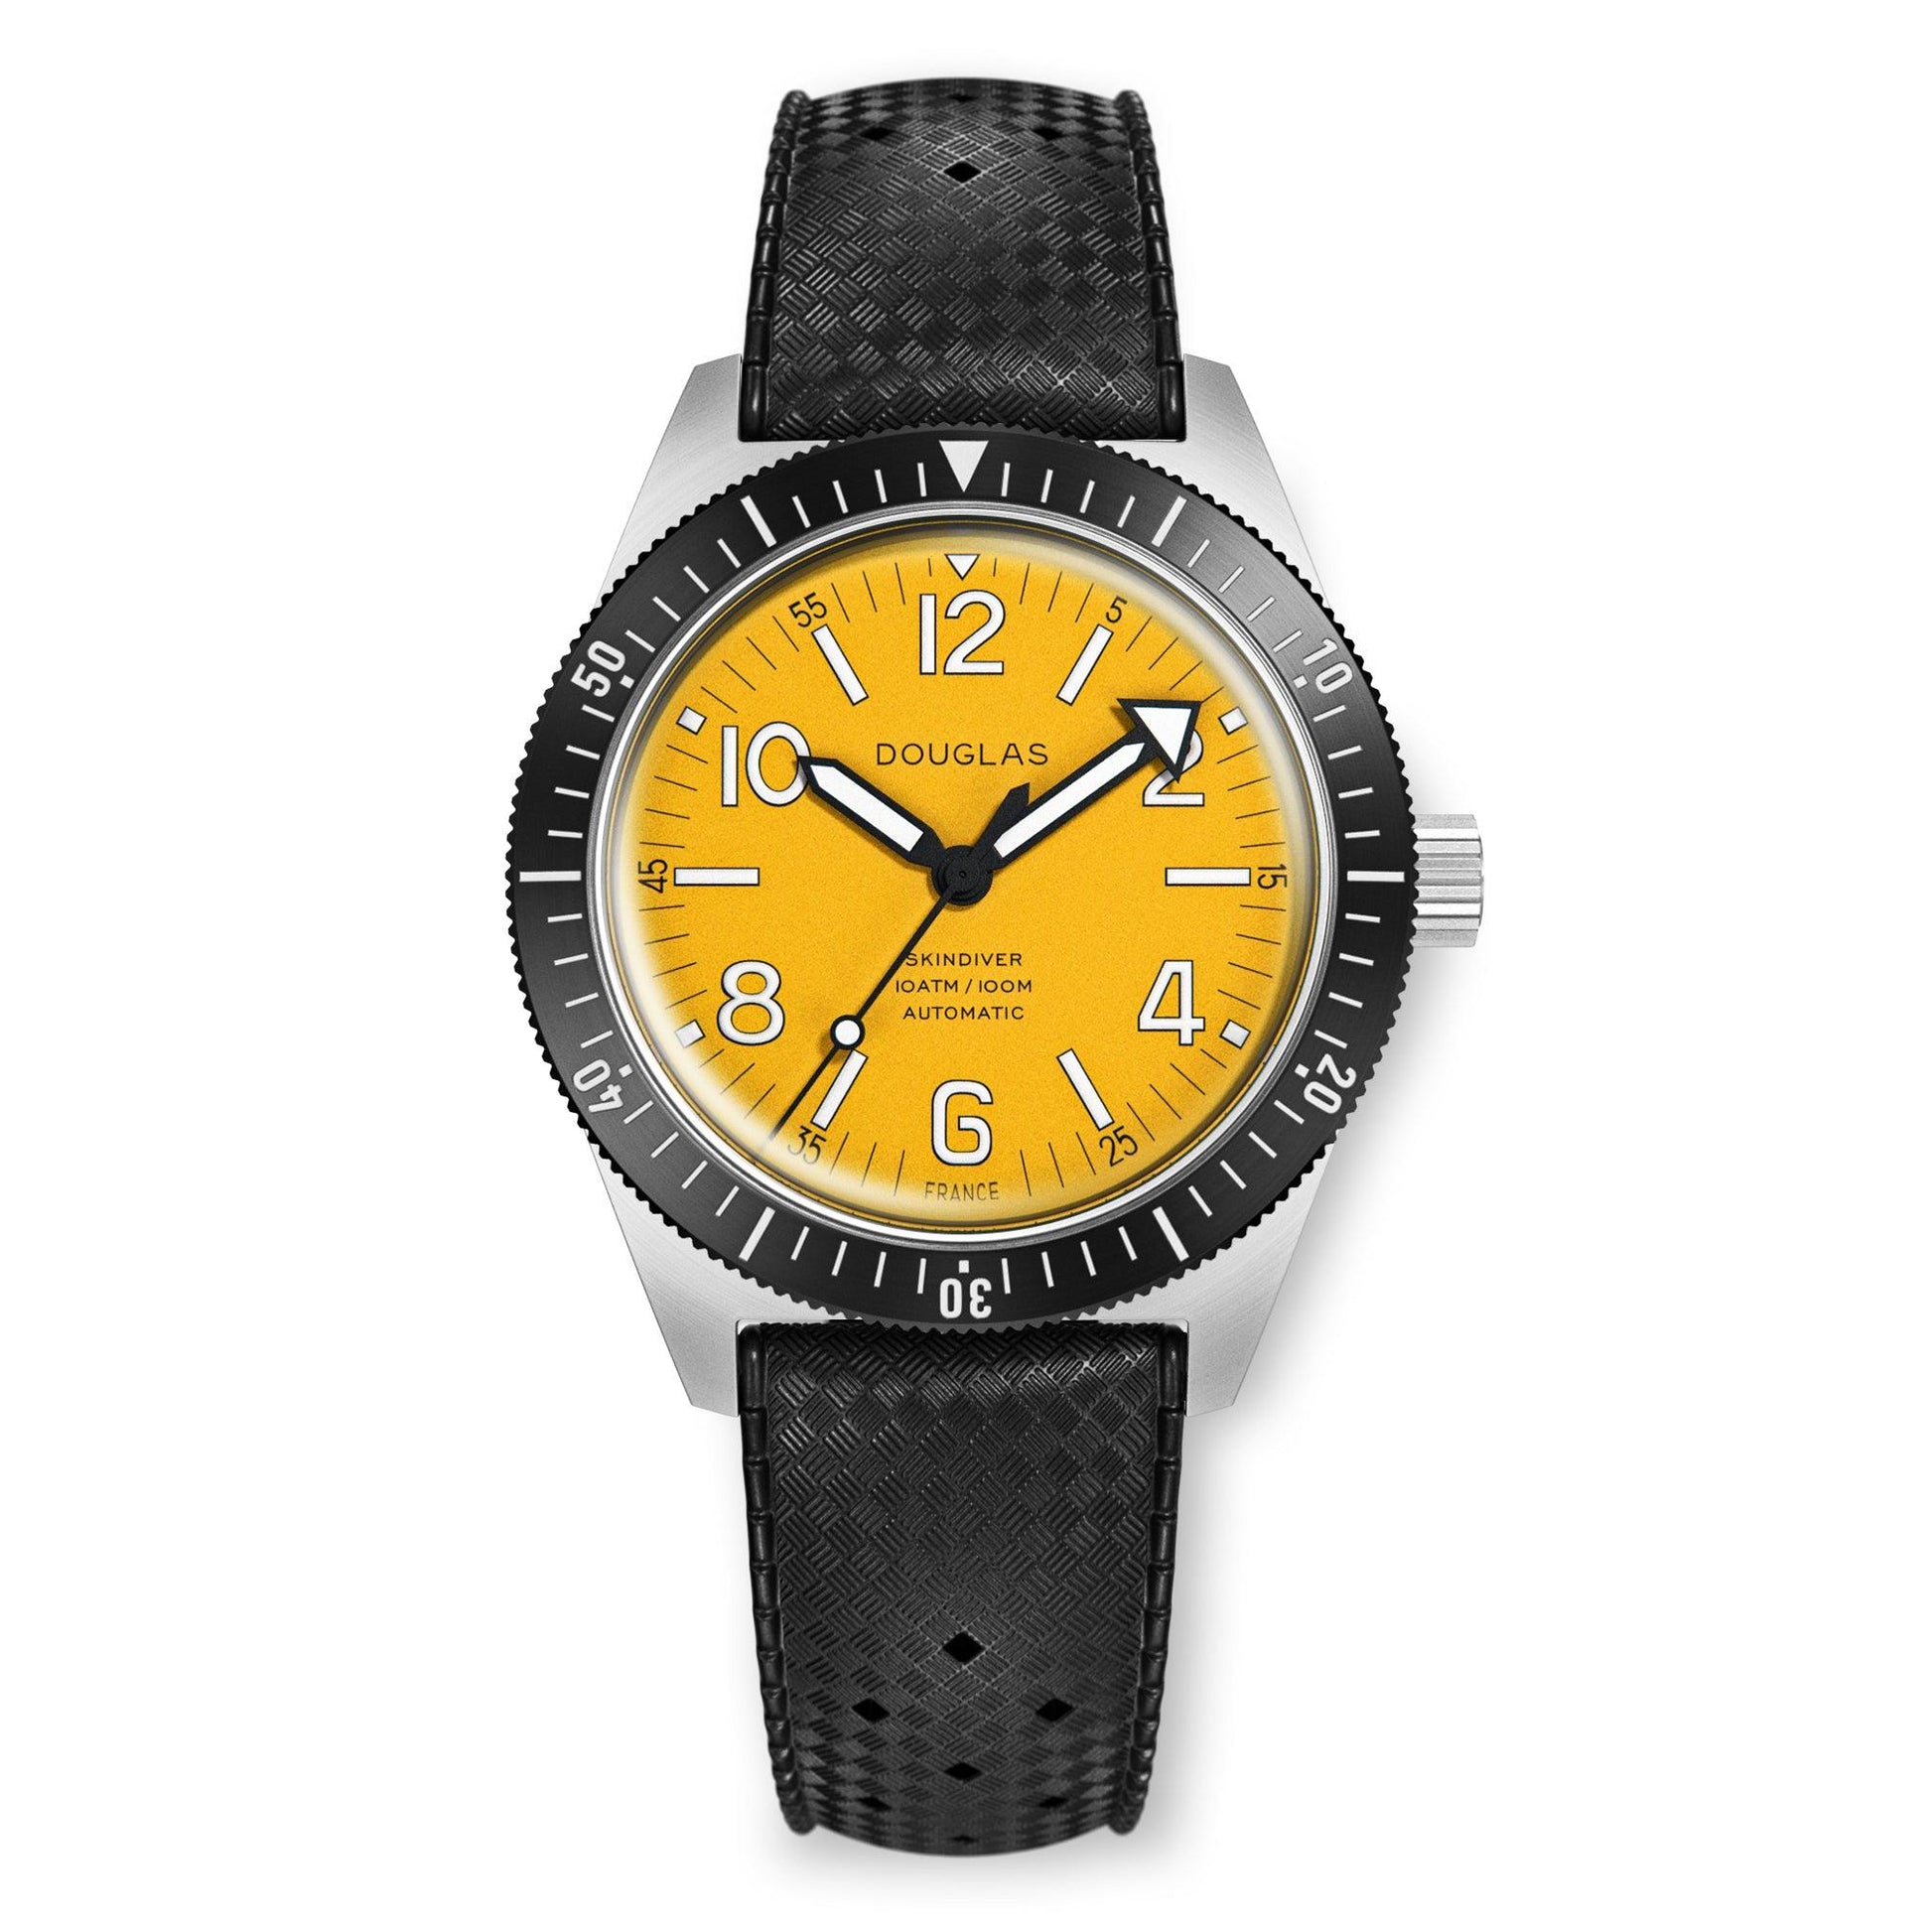 Skindiver Professional Tool-Watch - Yellow - Wolbrook Watches